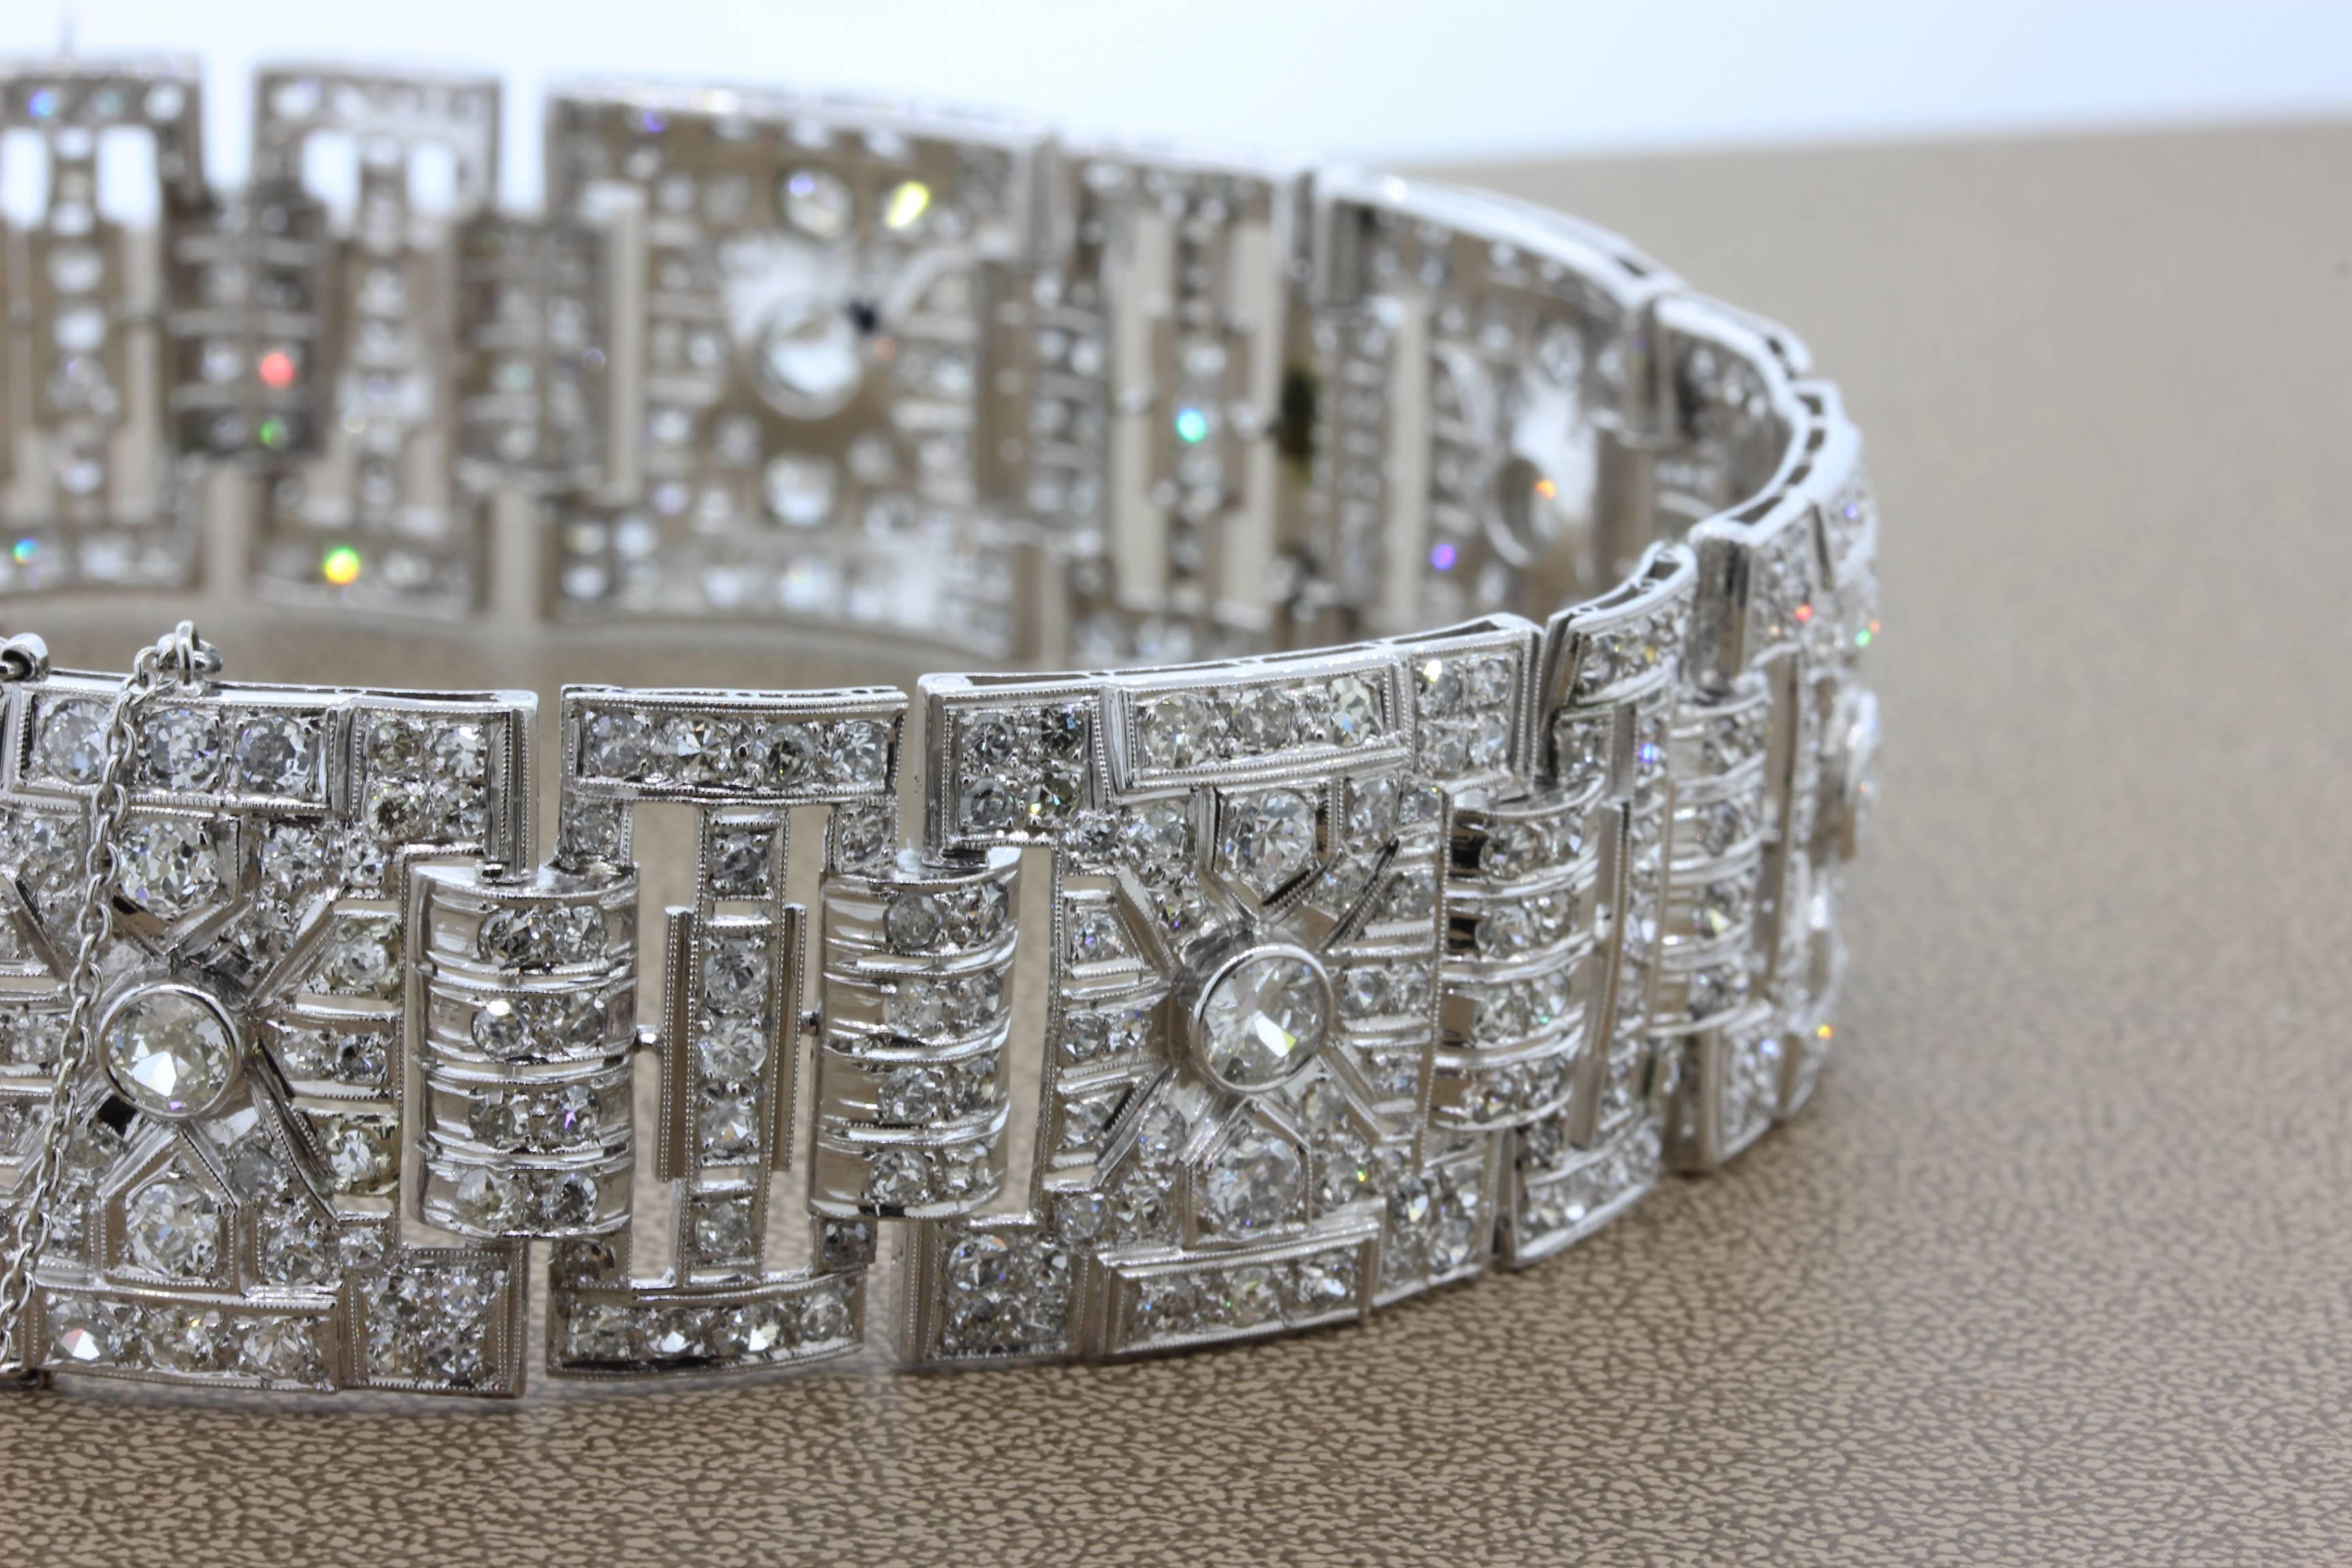 A classic diamond bracelet from the 1930’s this Art Deco piece features approximately 18.95 carats of round European cut diamonds set in platinum. In traditional fashion the diamonds are all finished with milgrain settings. 

Dimensions: 8.0 x 1.0